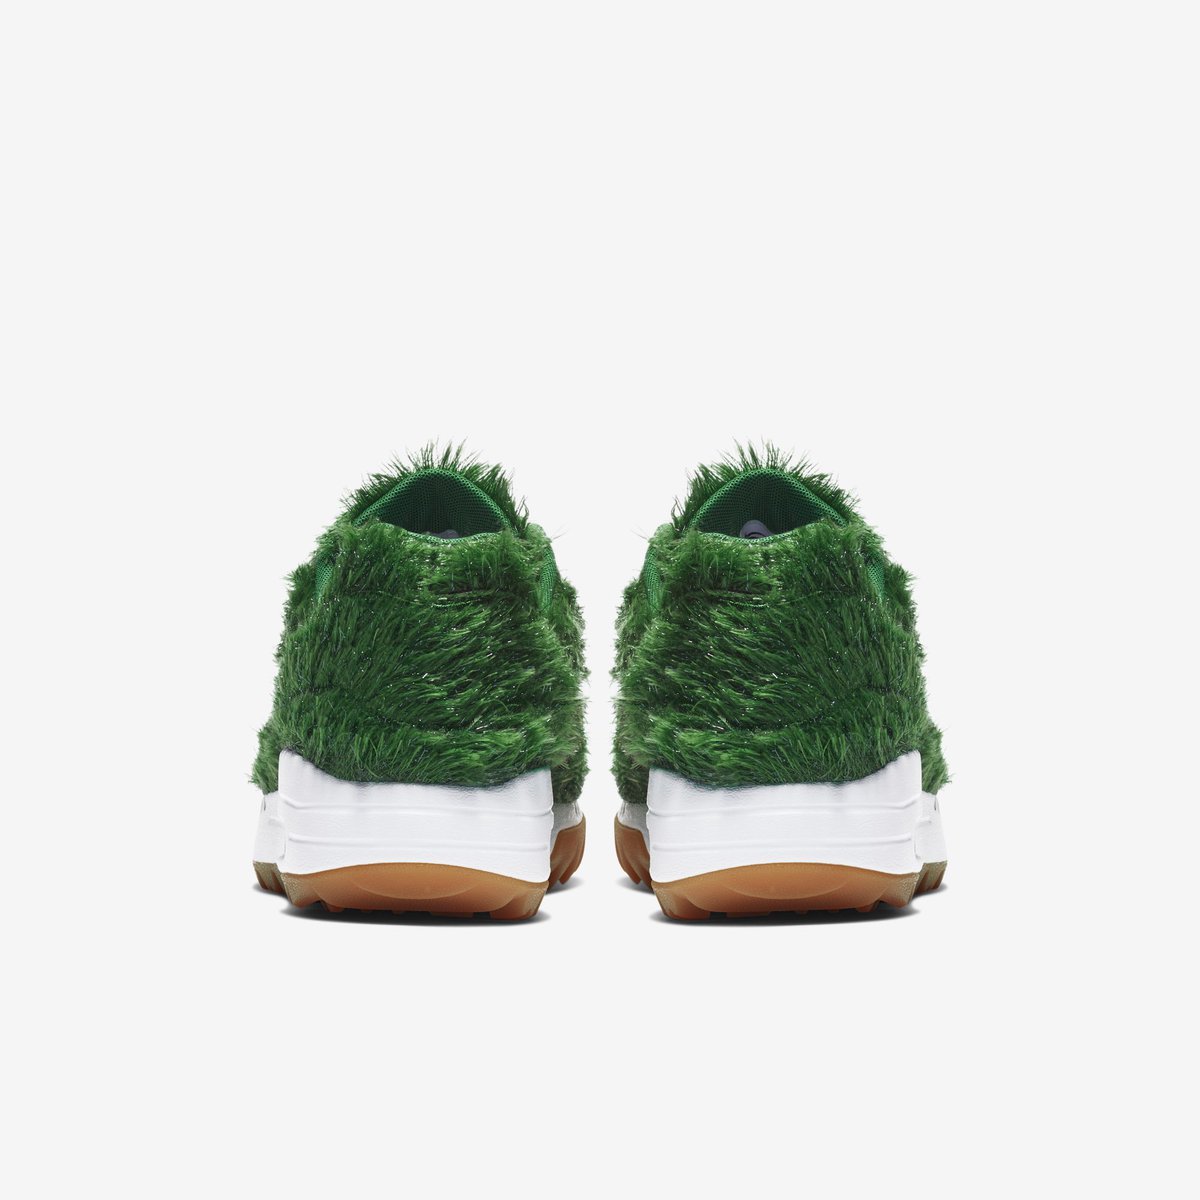 Would You Wear These Weird Nike Sneakers Made Of âGrassâ? â SatisFashion Uganda